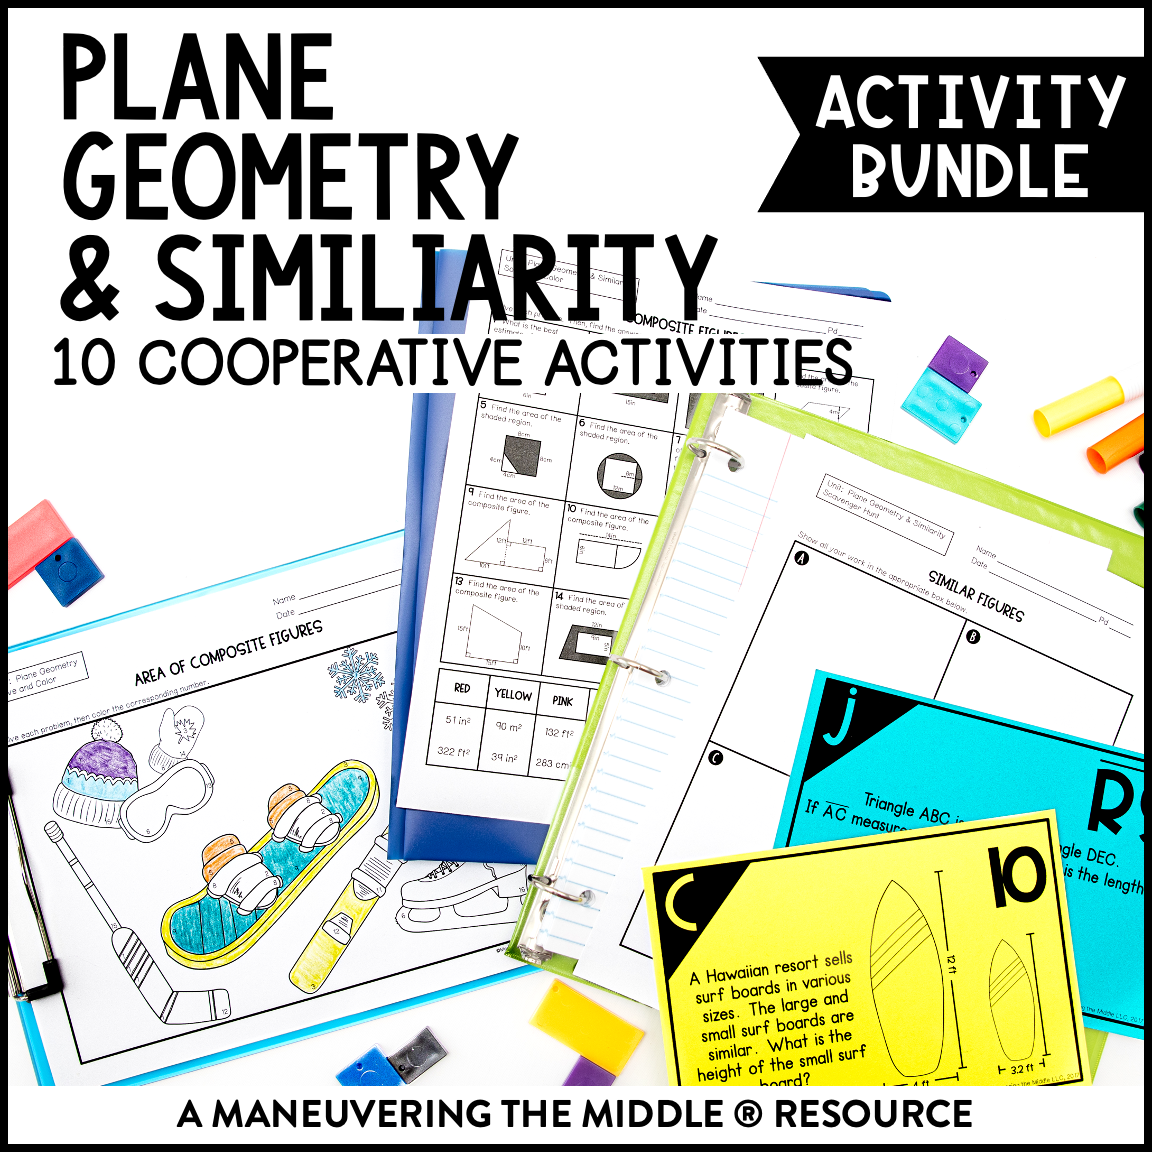 Plane Geometry and Similarity Activity Bundle 7th Grade - 9 activities: circumference, area of circles, triangles, quadrilaterals, & composite figures. | maneuveringthemiddle.com